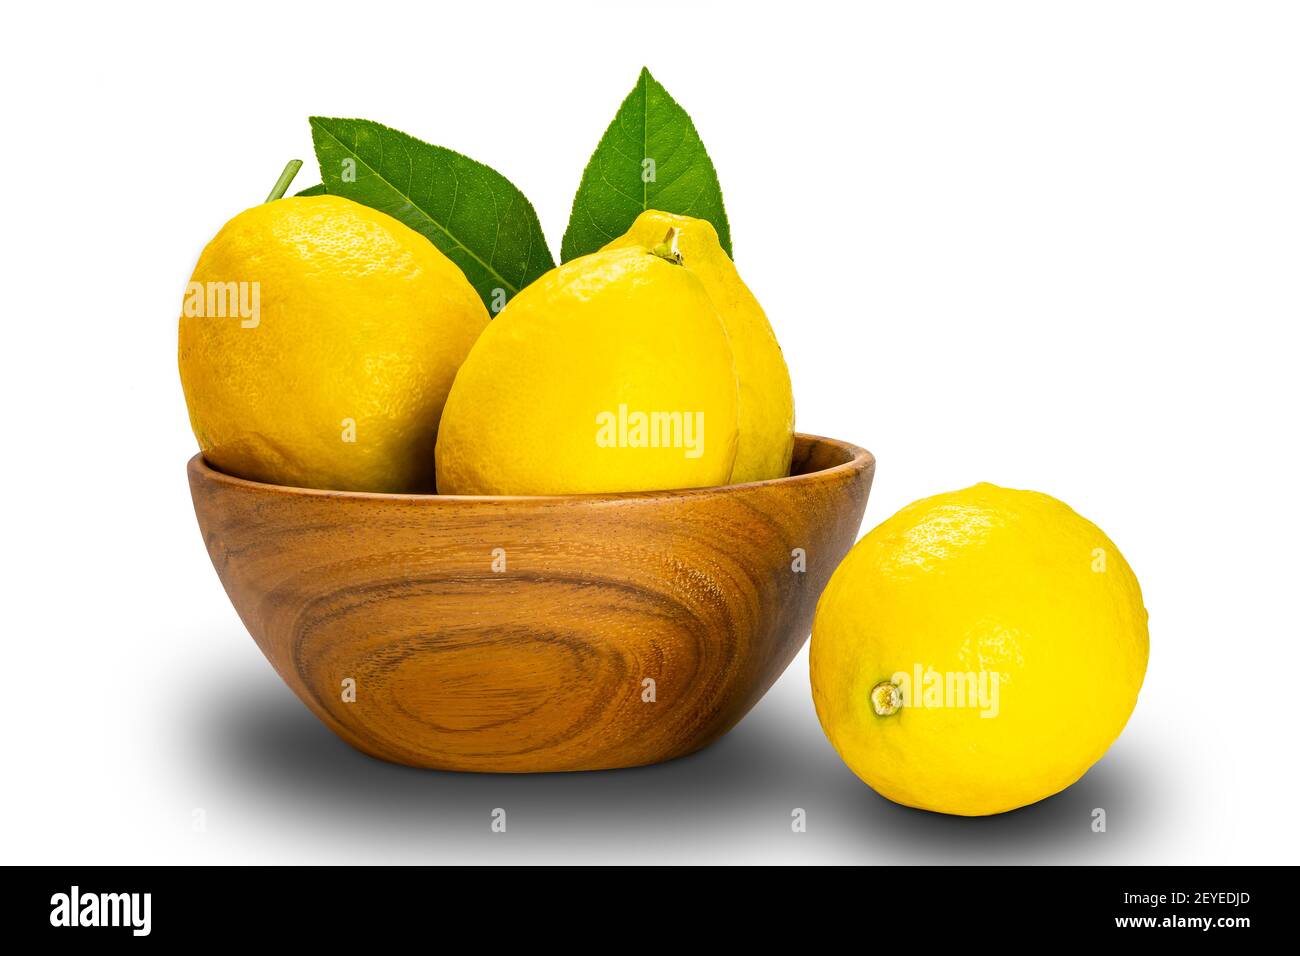 Ripe lemons with leaves in a wooden bowl on white background with clipping path. Stock Photo